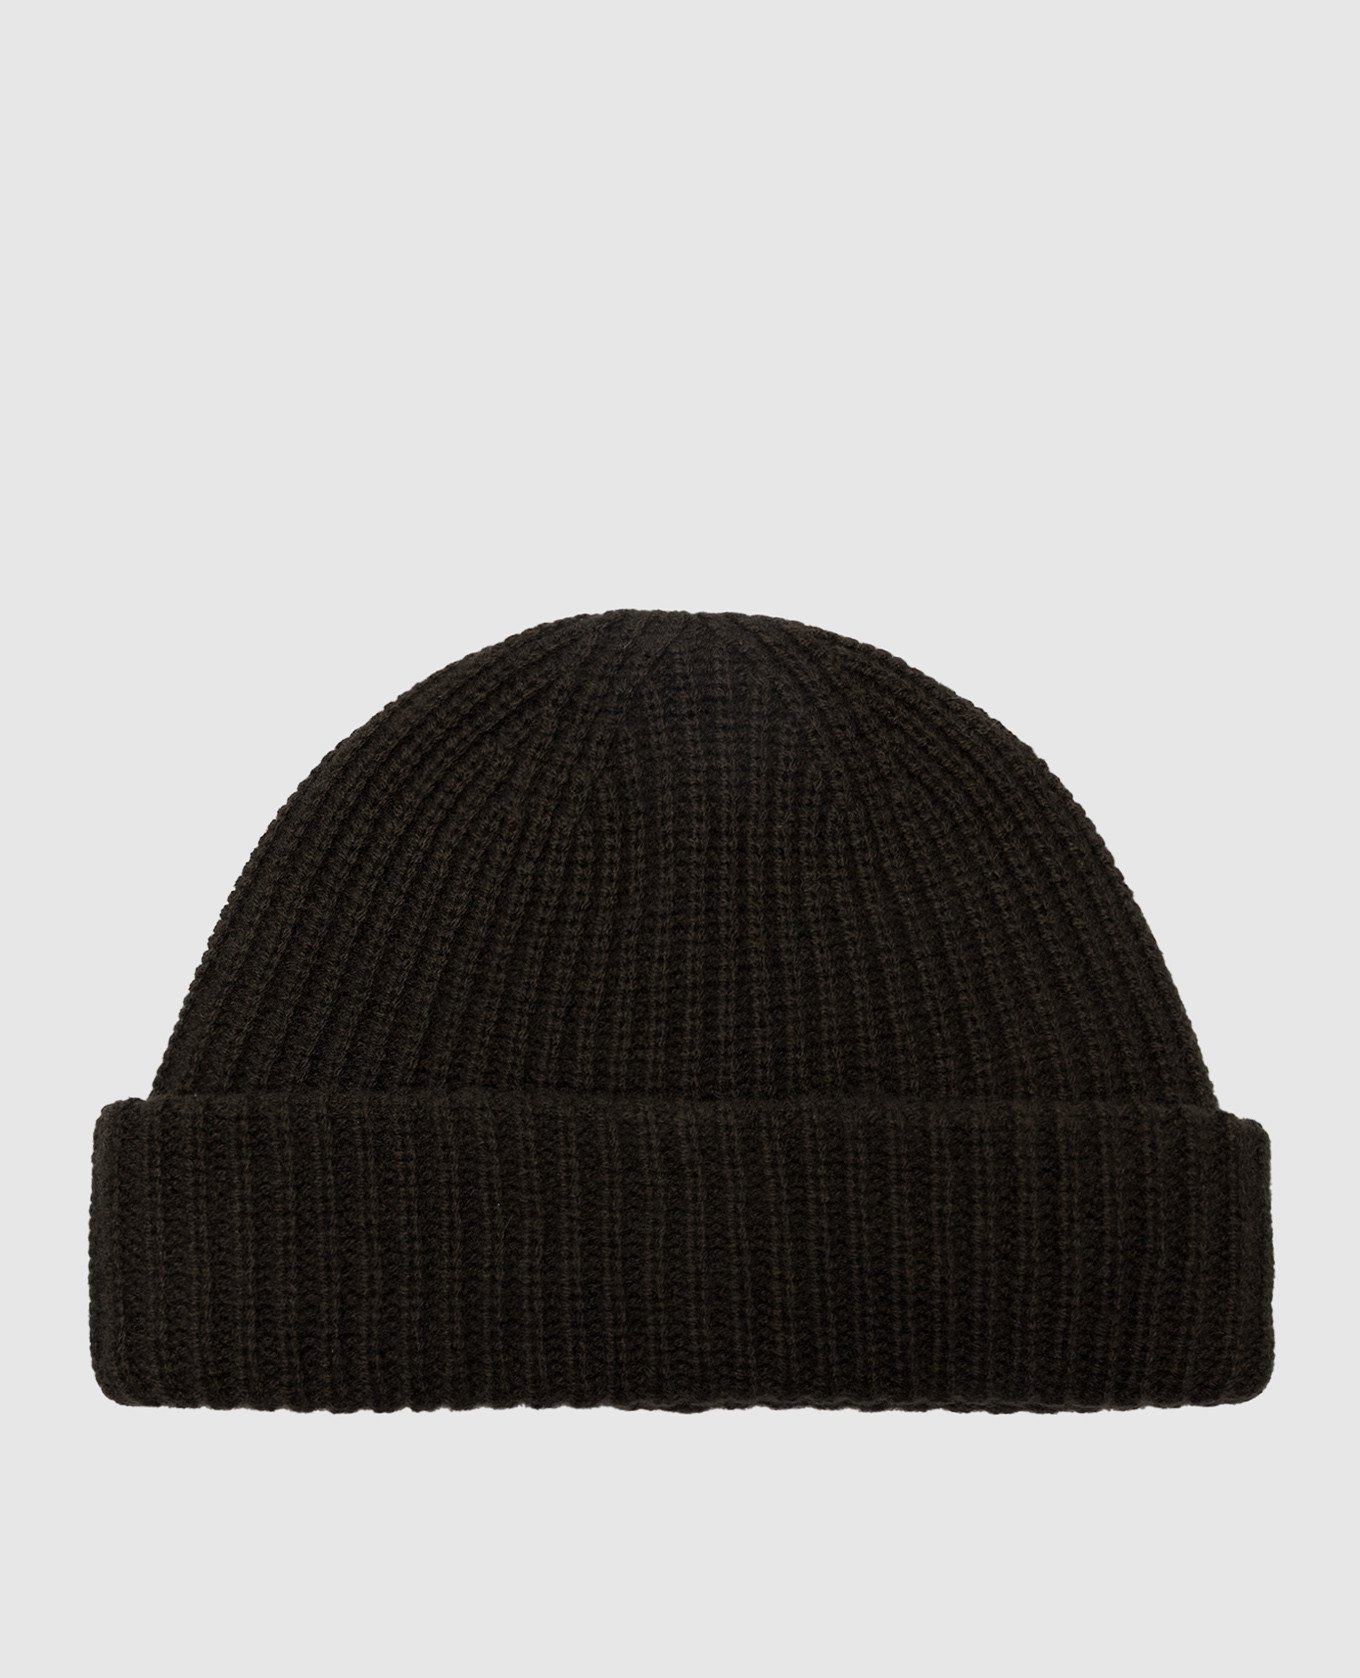 Khaki hat made of wool and cashmere